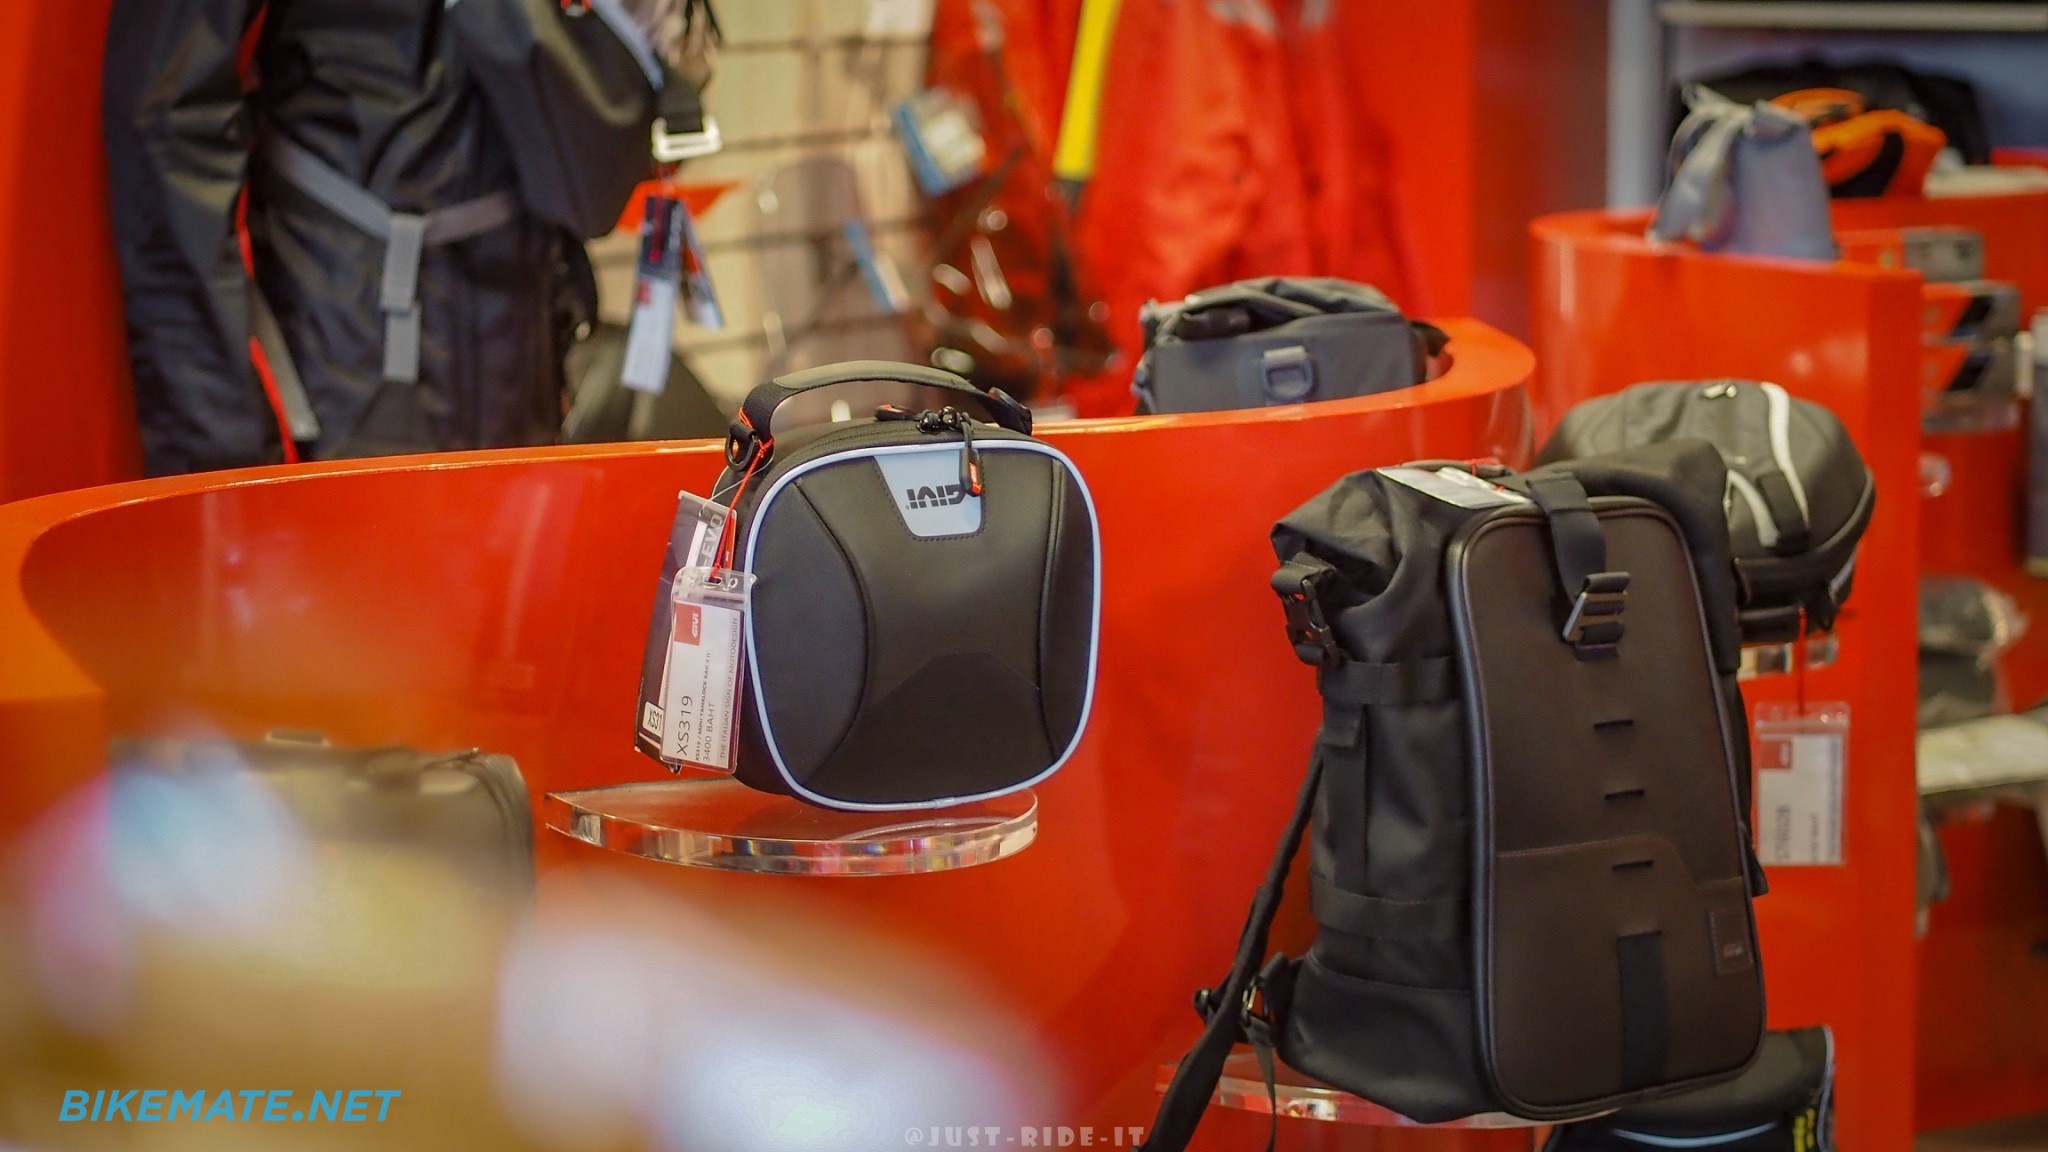 GIVI tank bags and side bags for motorcycle